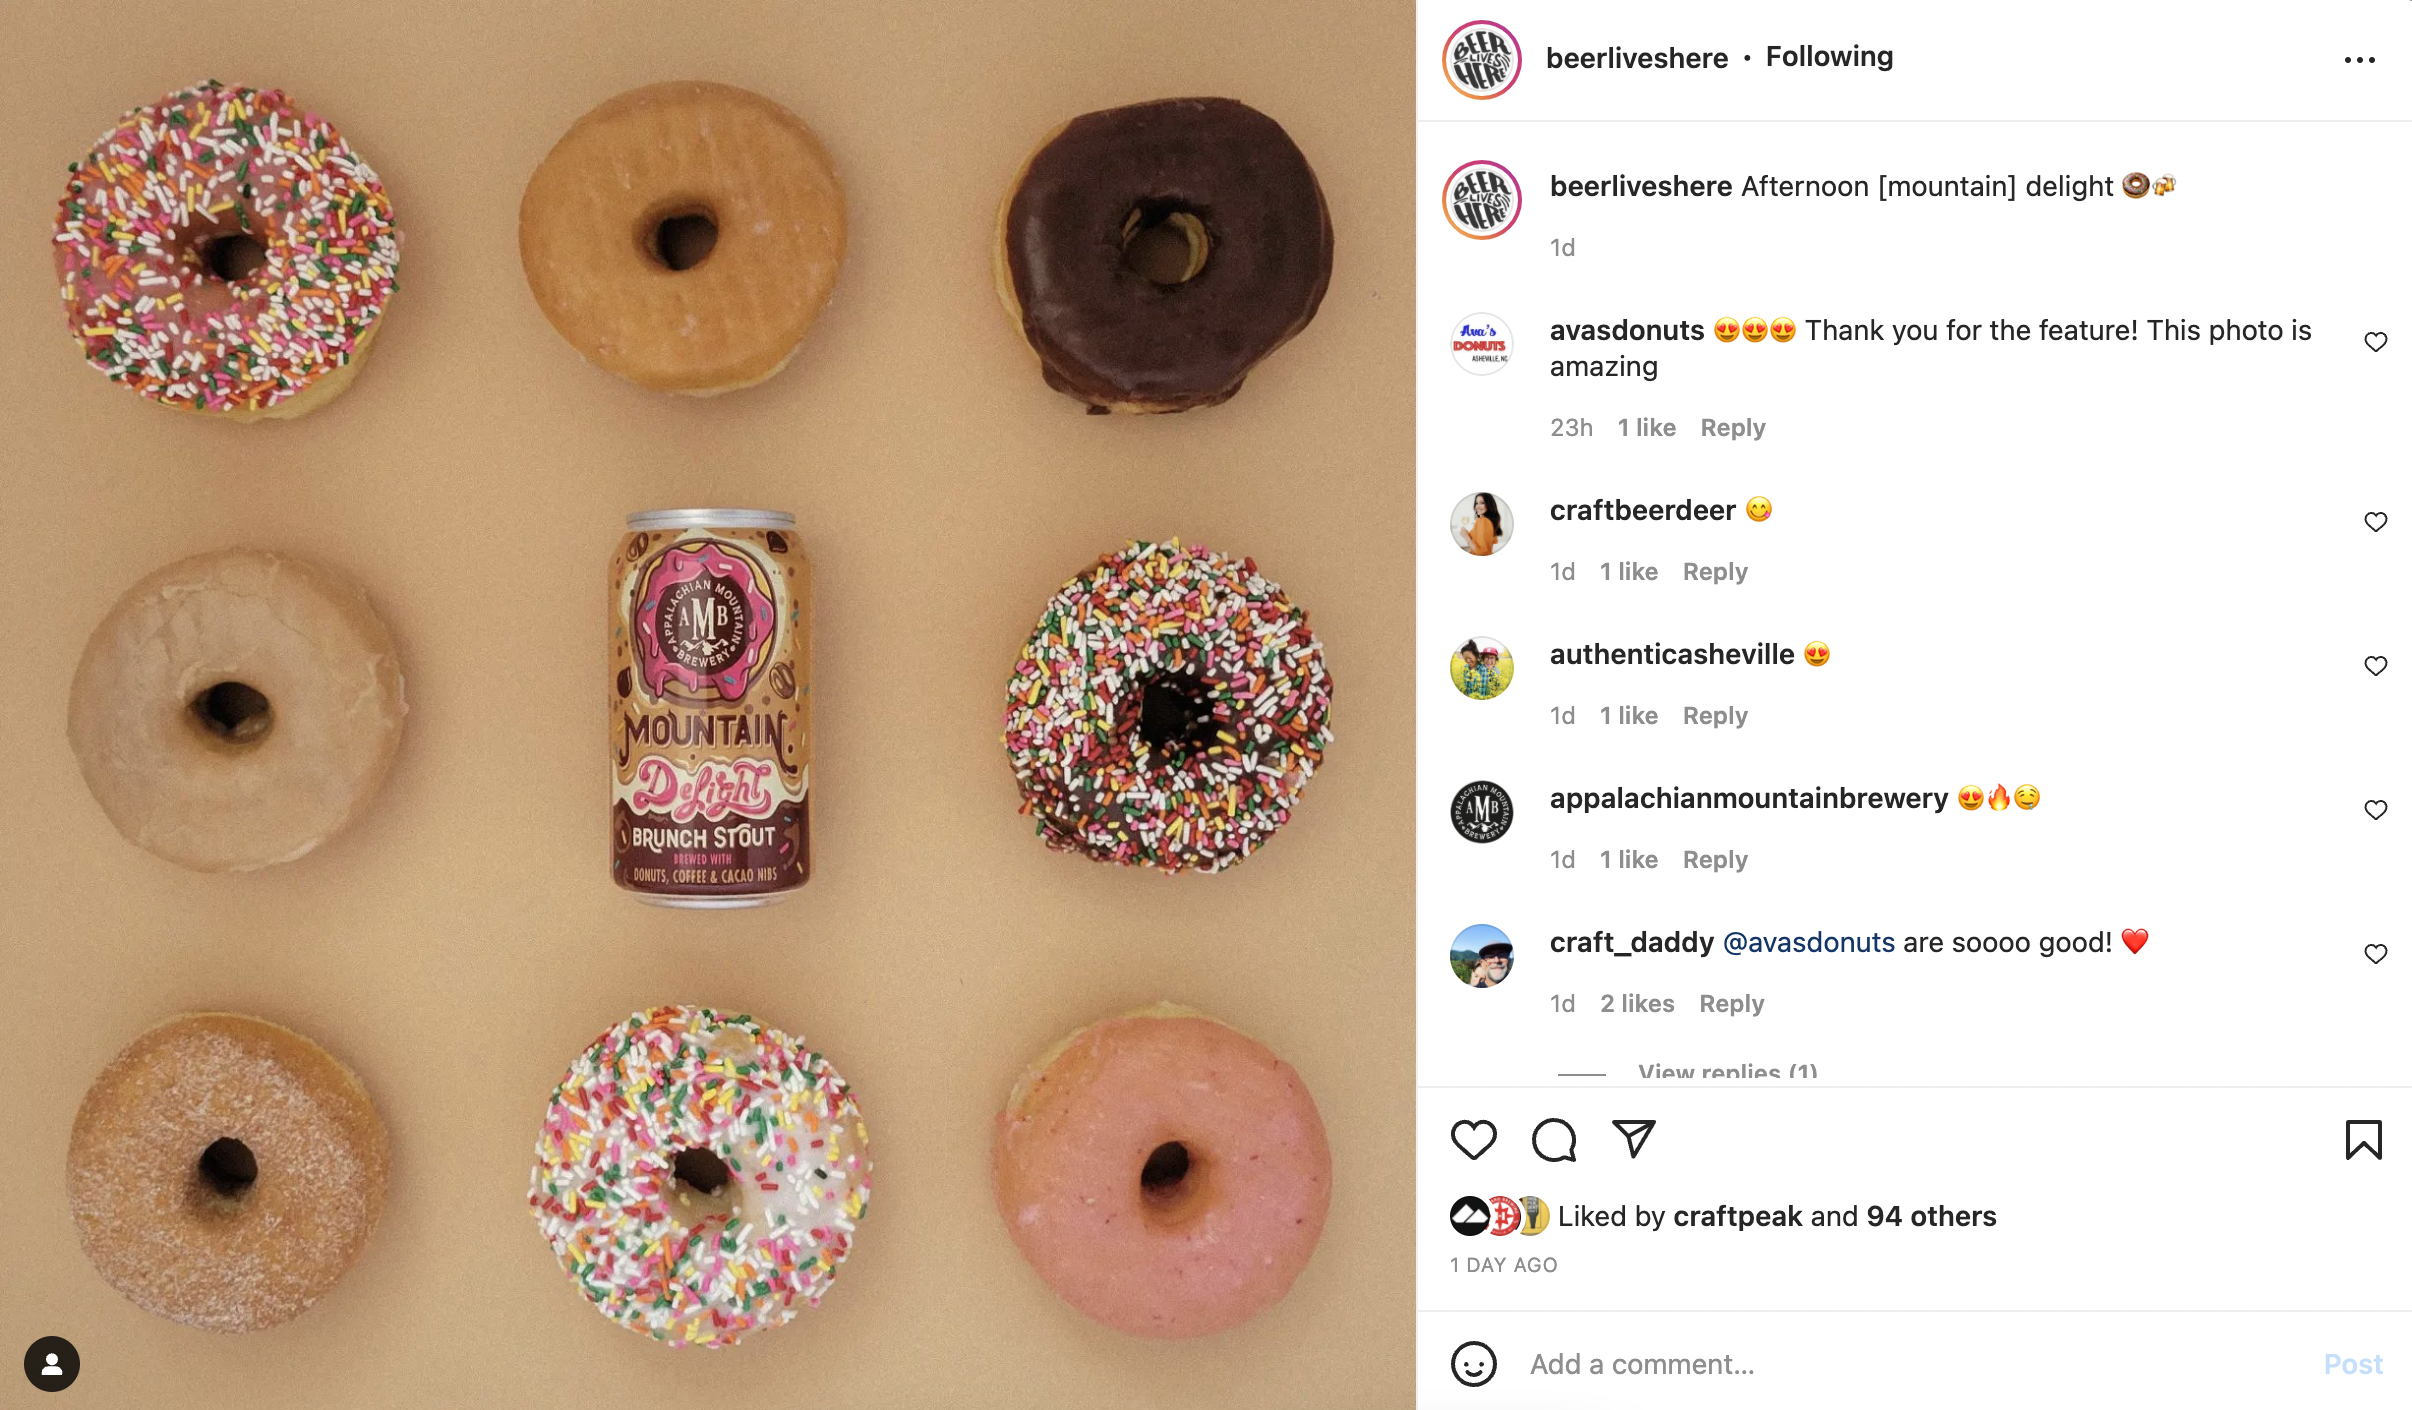 Instagram shot from @beerliveshere of a can of beer surrounded by doughnuts